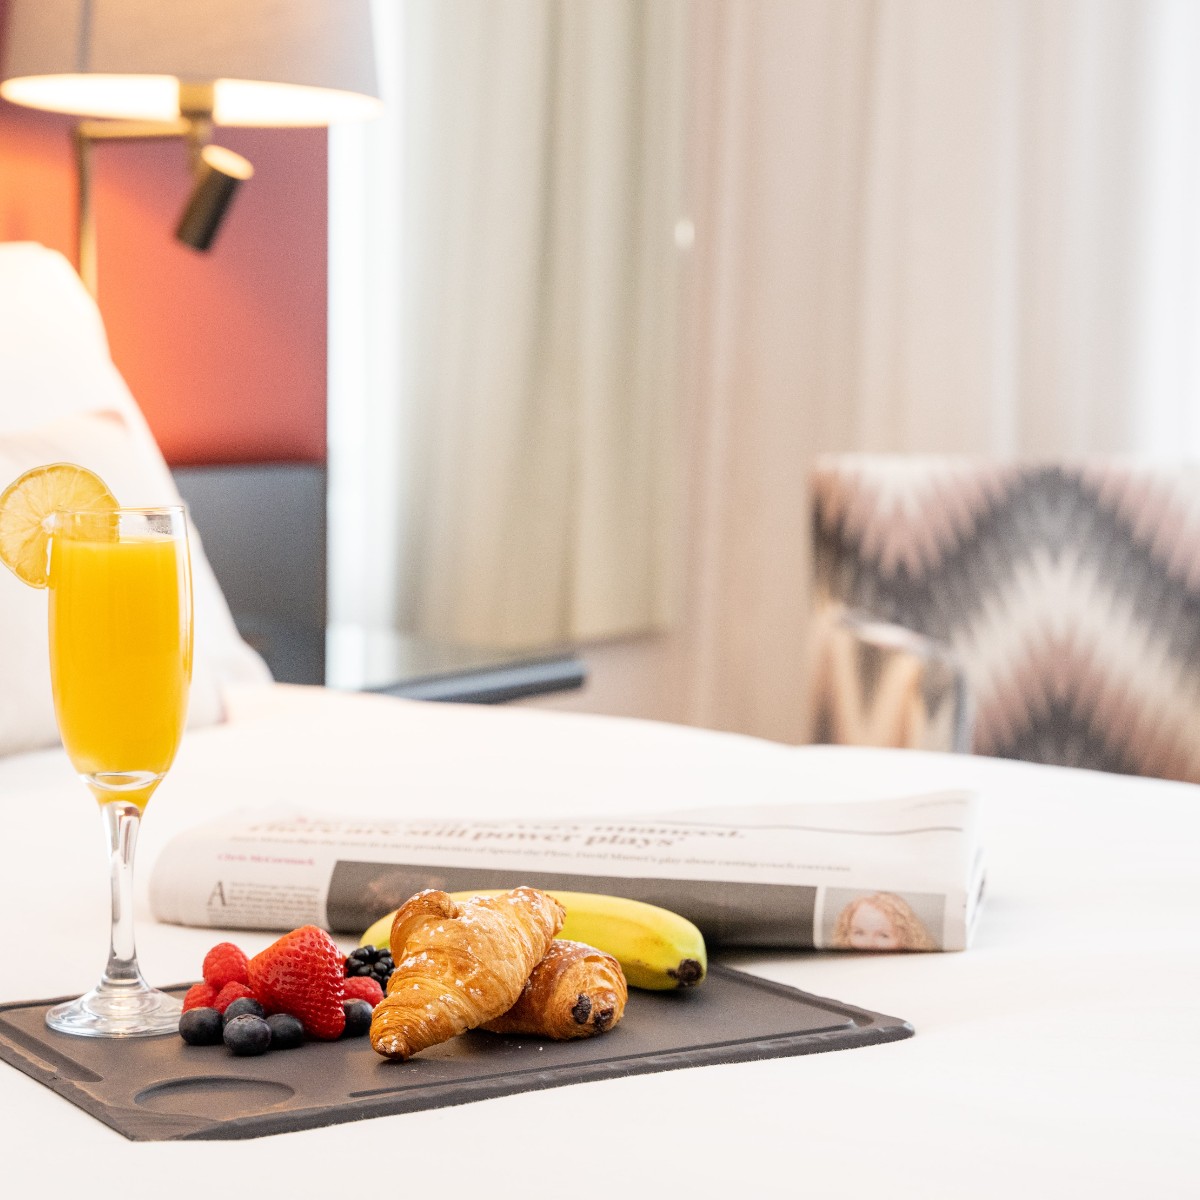 Breakfast with a bit of difference at The Spencer Hotel

#TheSpencerHotel #DublinHotel #BreakfastinBed